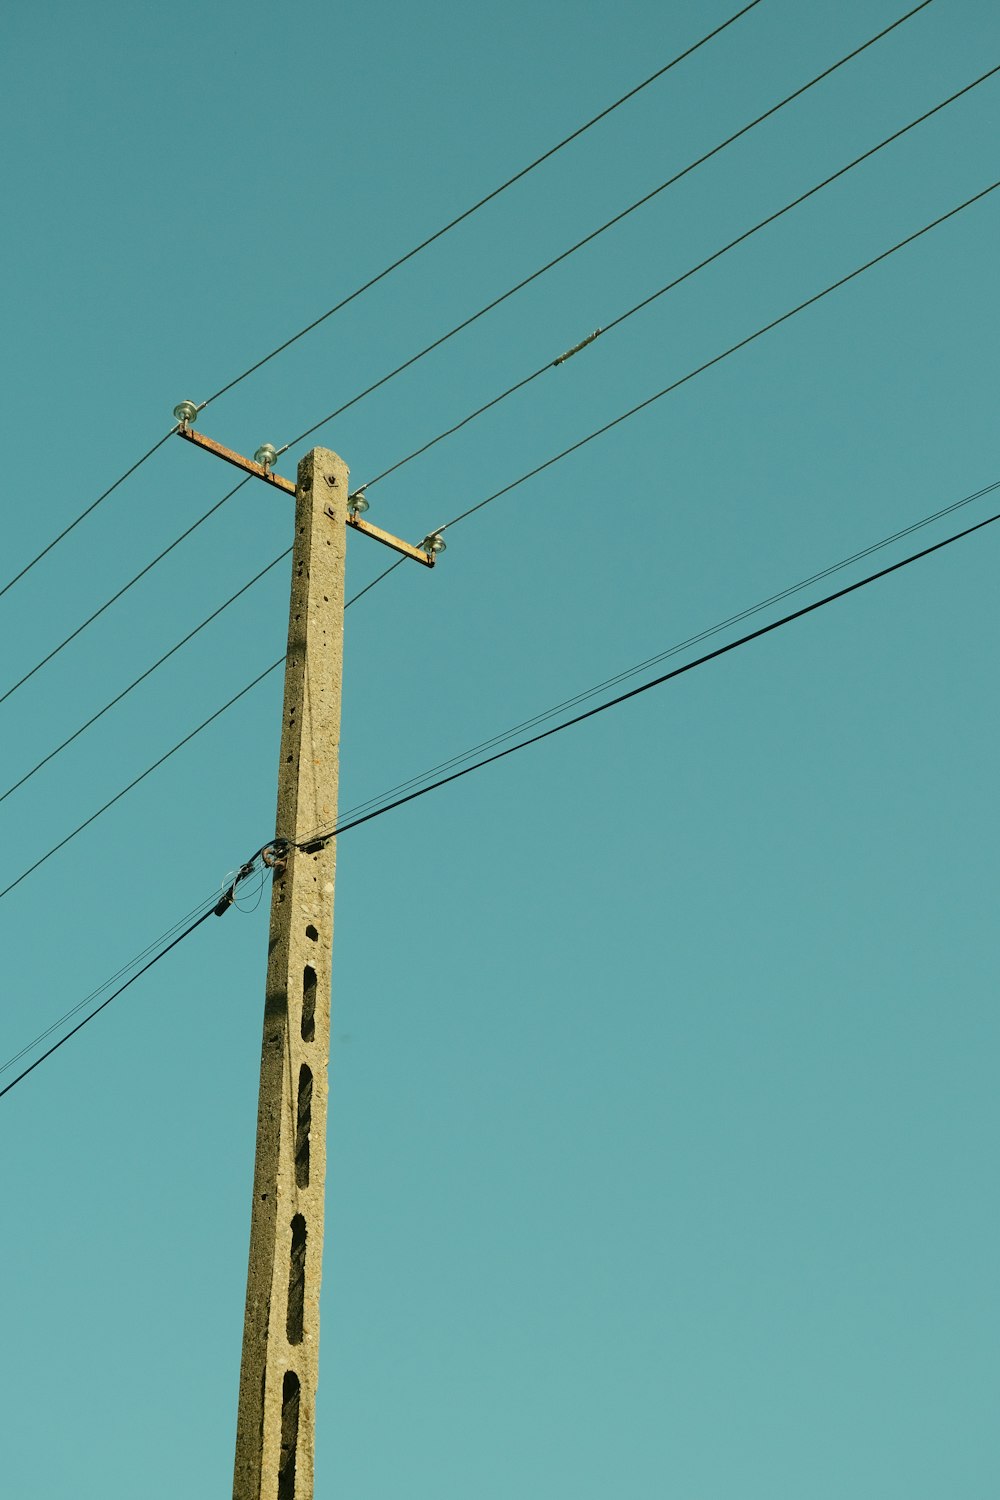 a tall wooden pole with power lines above it